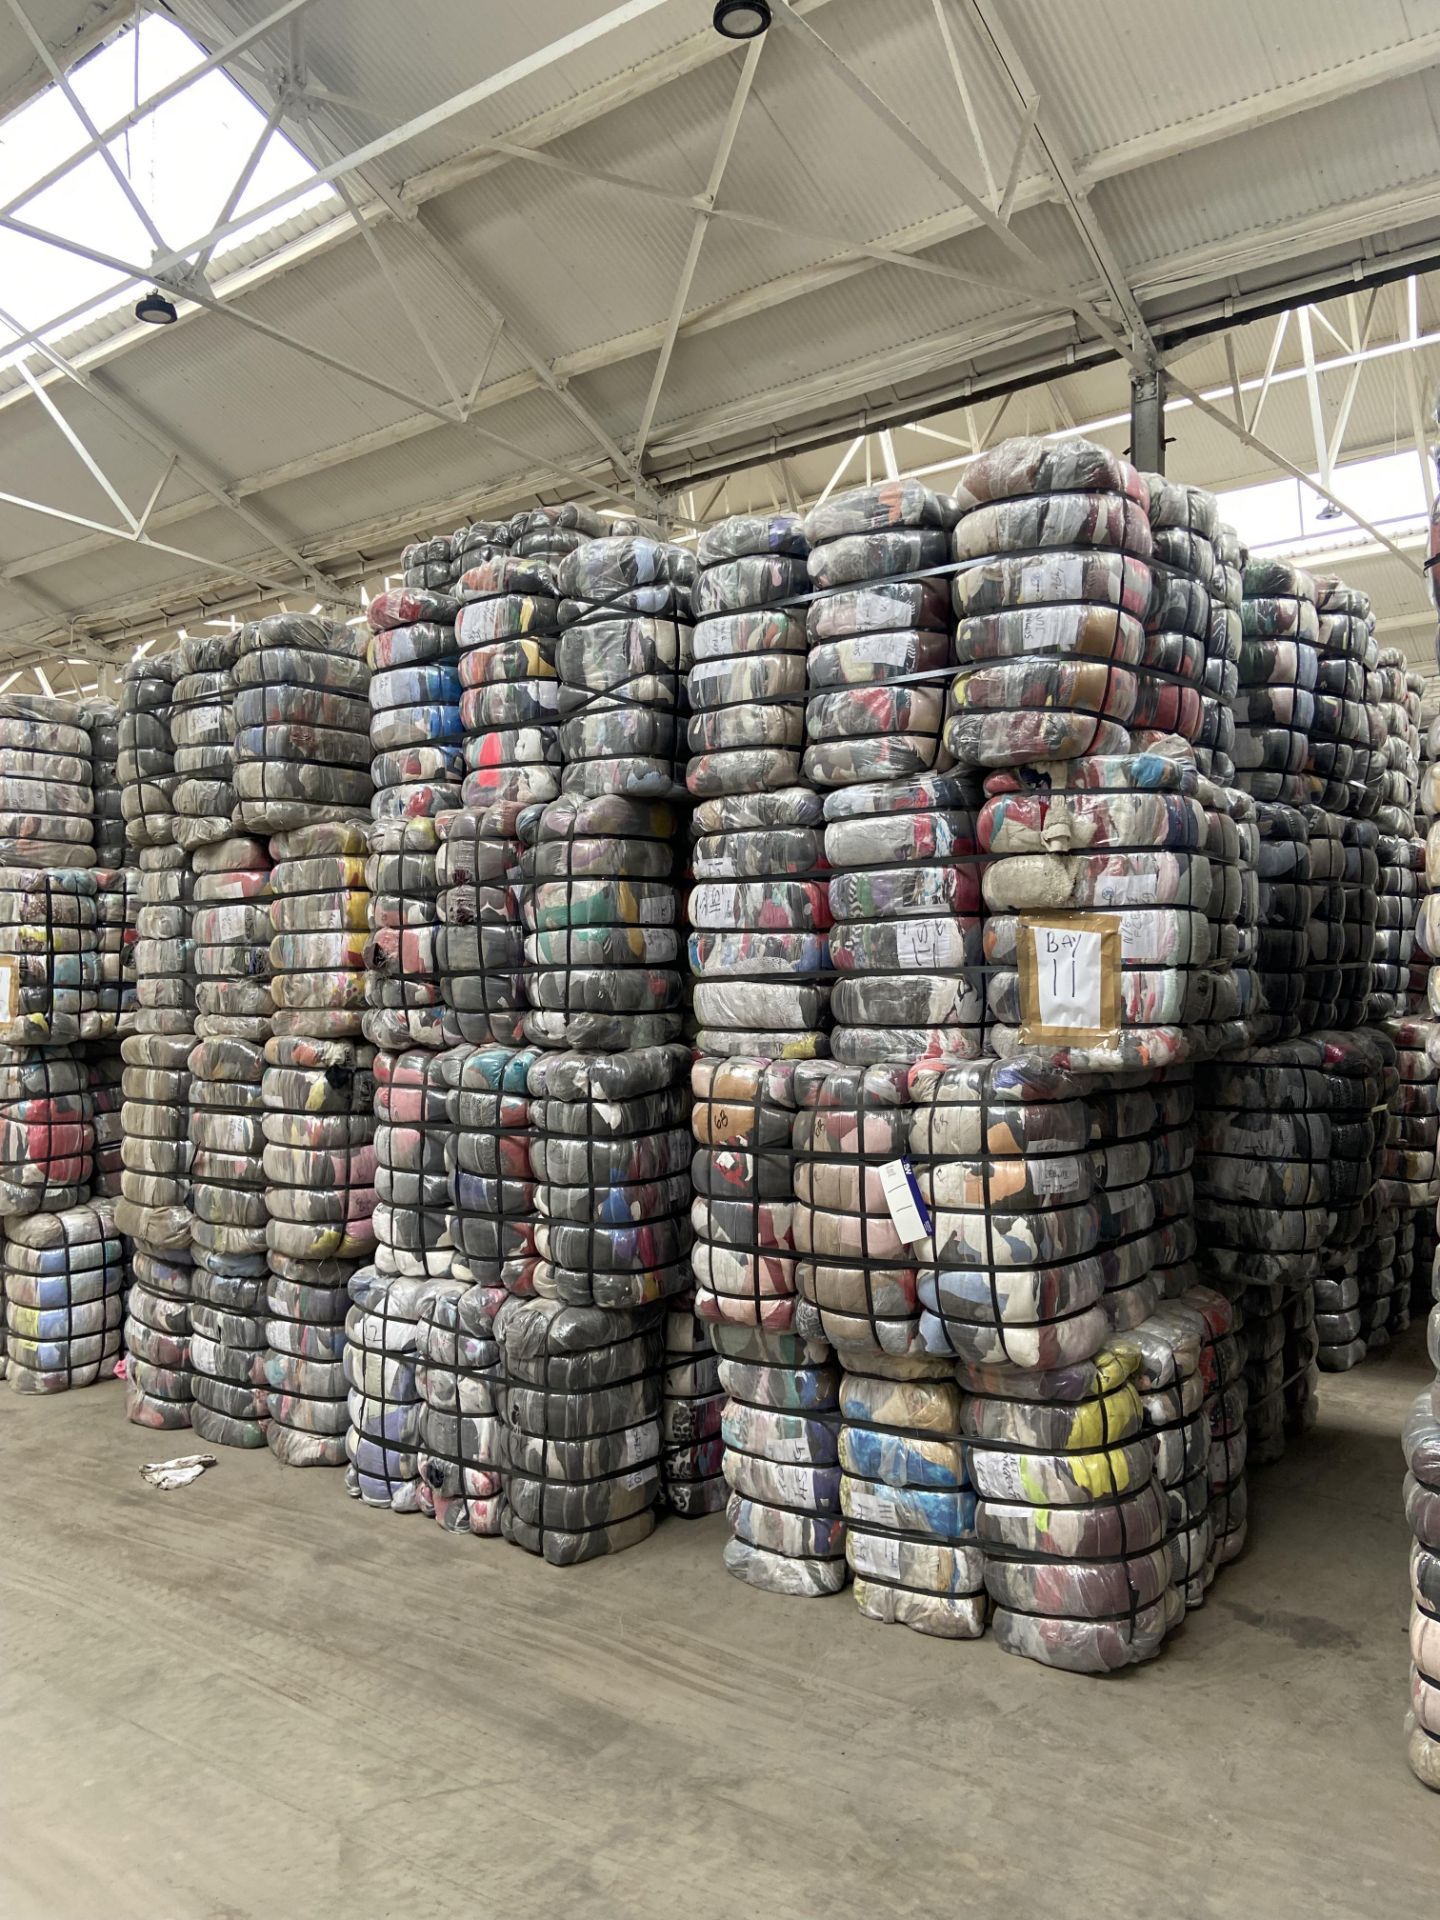 APPROX 224 BALES (10,080KG) RECYCLABLE WASTE TEXTILES, Understood to comprise: Two bales x 45kg